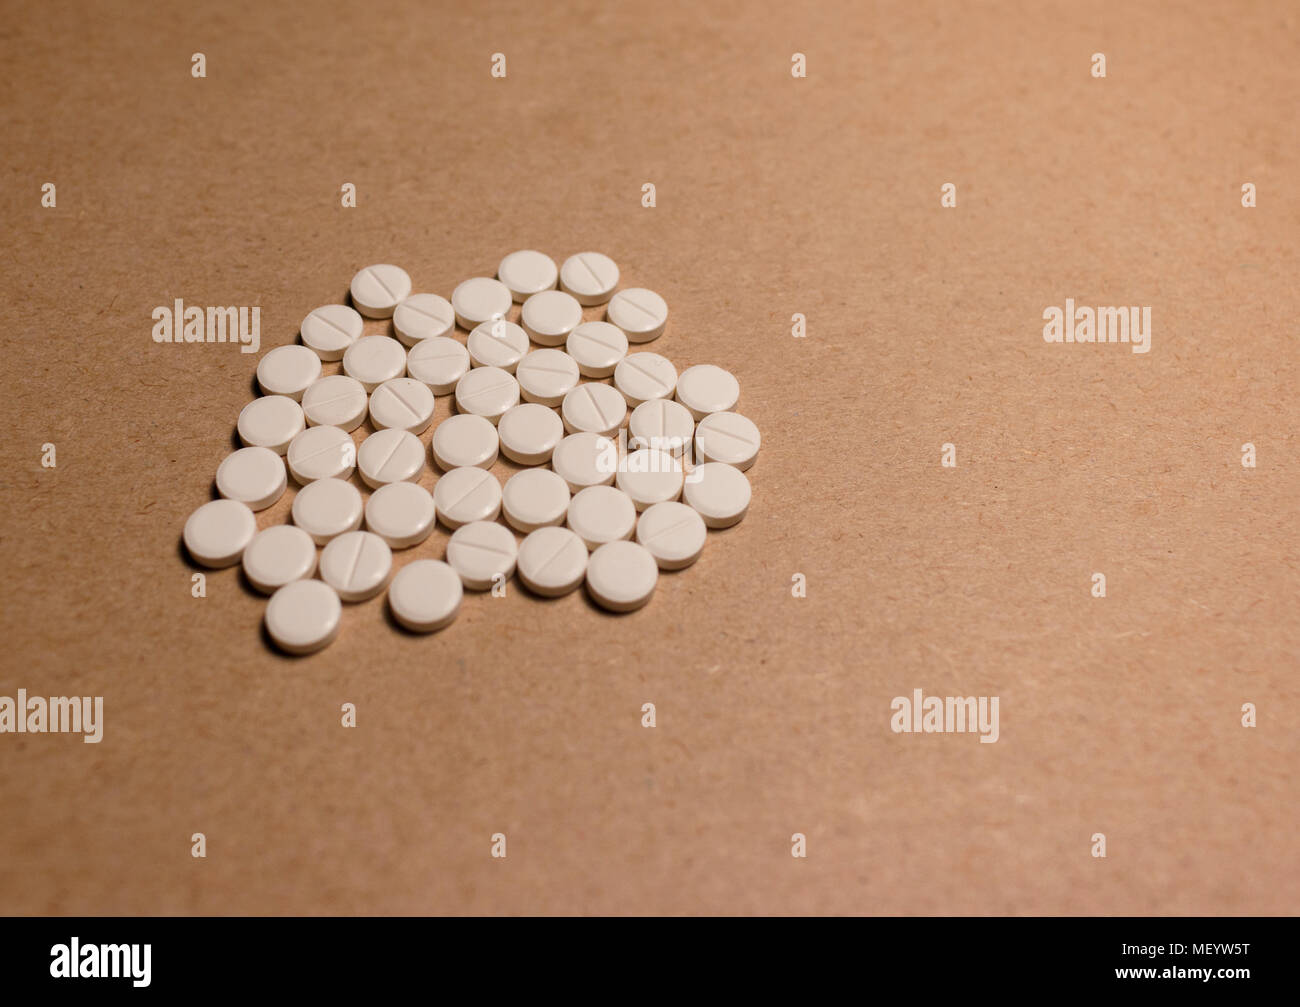 a pile of tablets isolated on a cardboard paper. A pile of beige medical tablets on a brown background Stock Photo